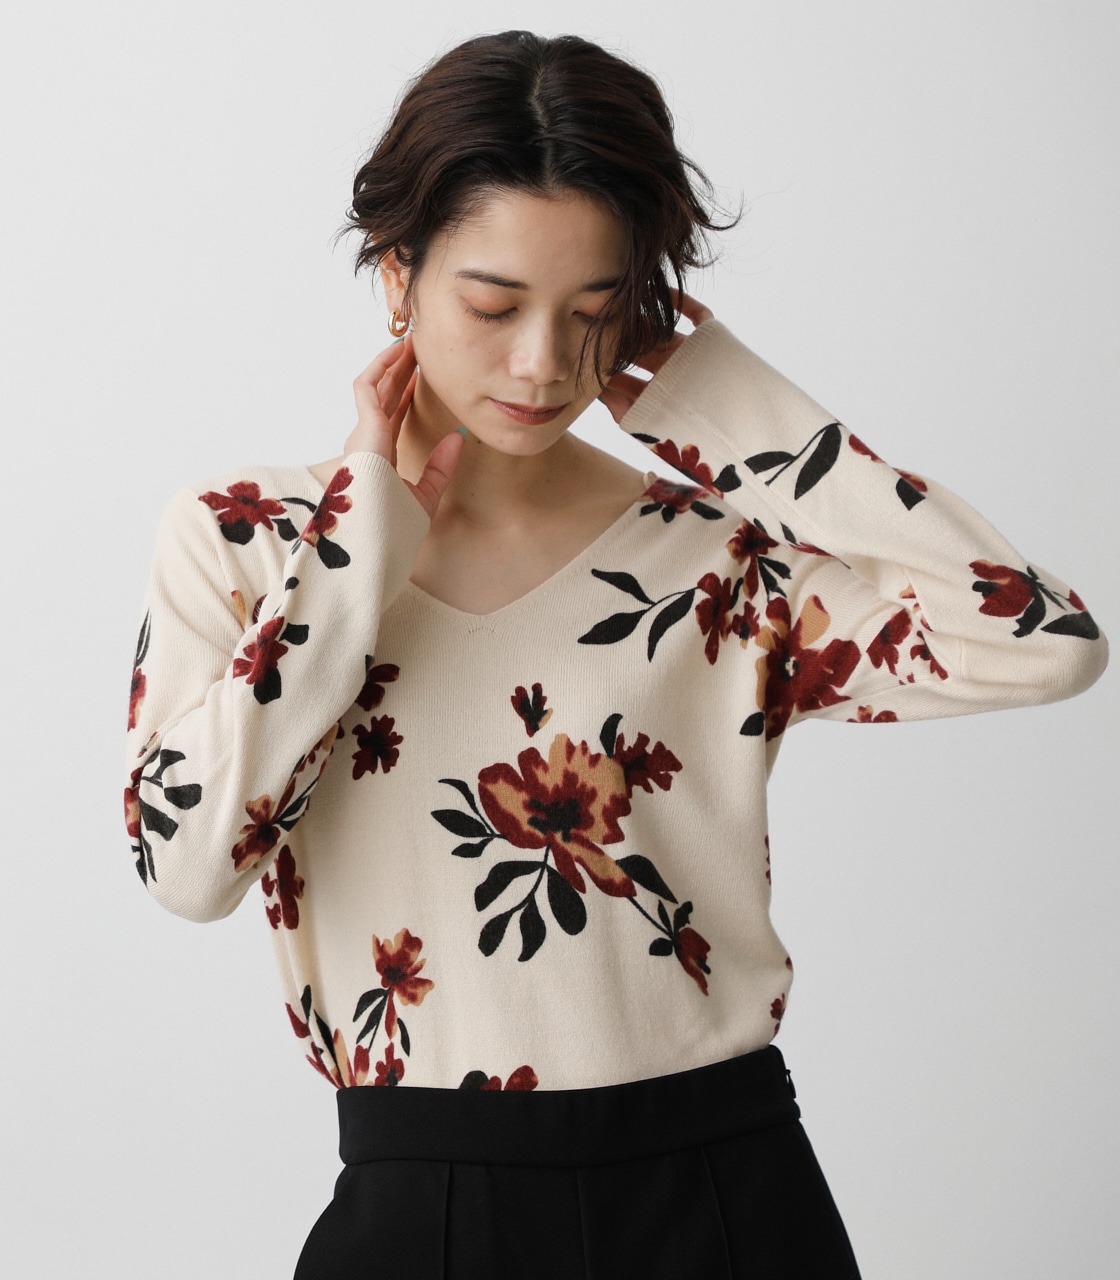 NUDIE 2WAY FLOWER KNIT TOPS/ヌーディー2WAYフラワーニットトップス 詳細画像 柄RED 3